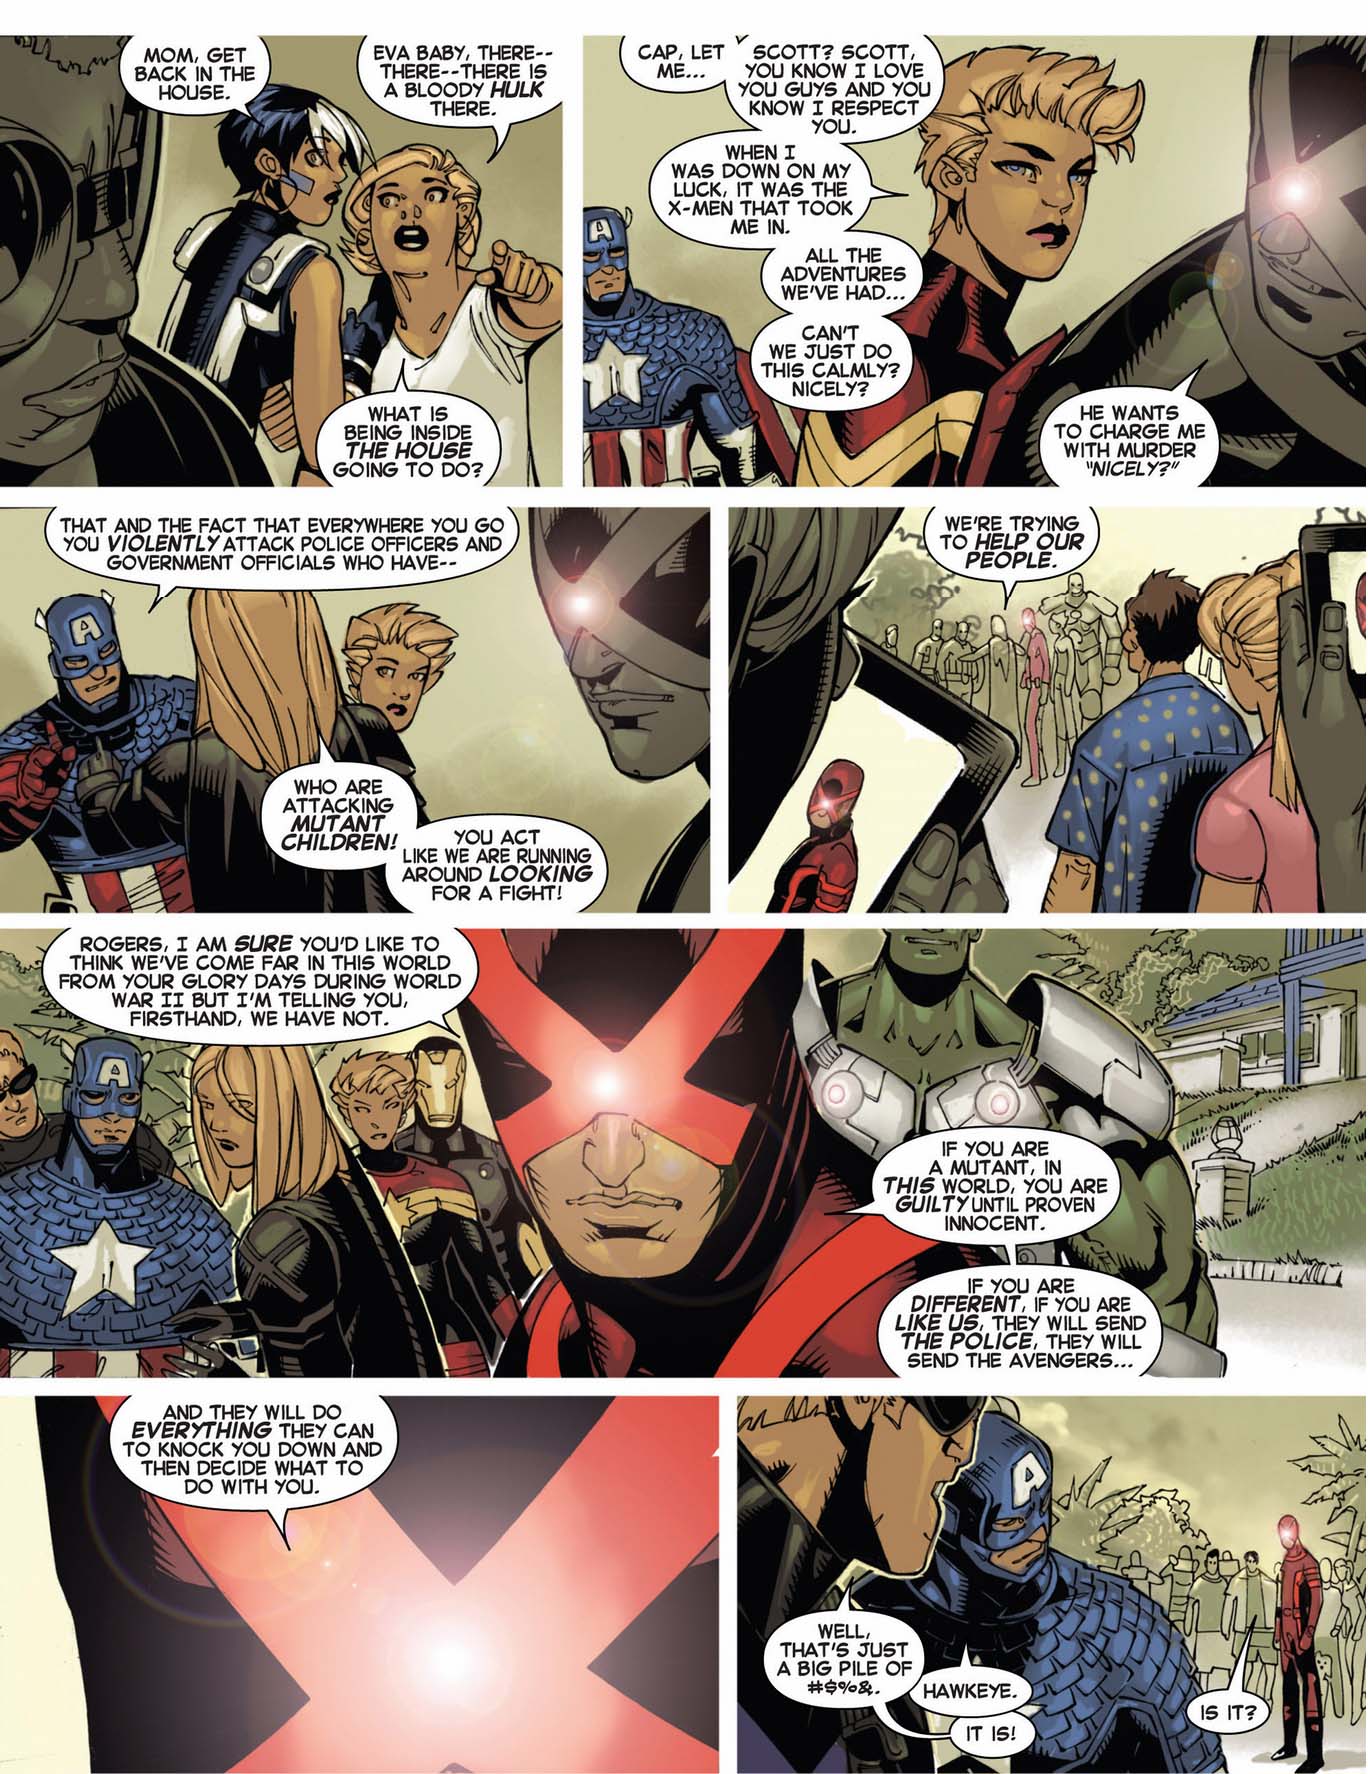 cyclops educating captain america on mutant rights